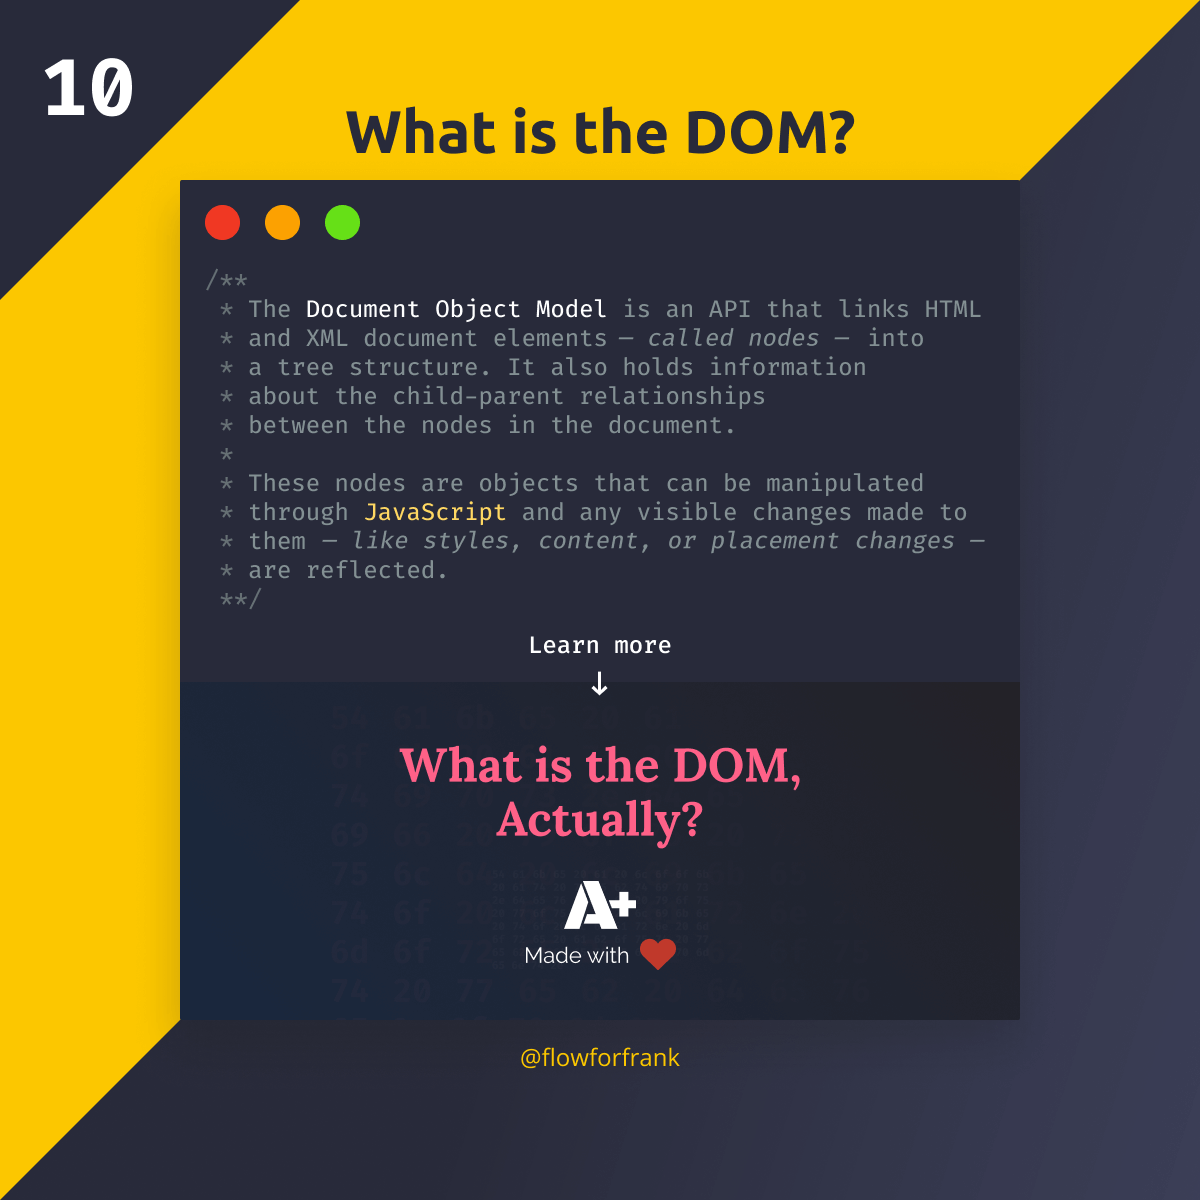 What is the DOM?